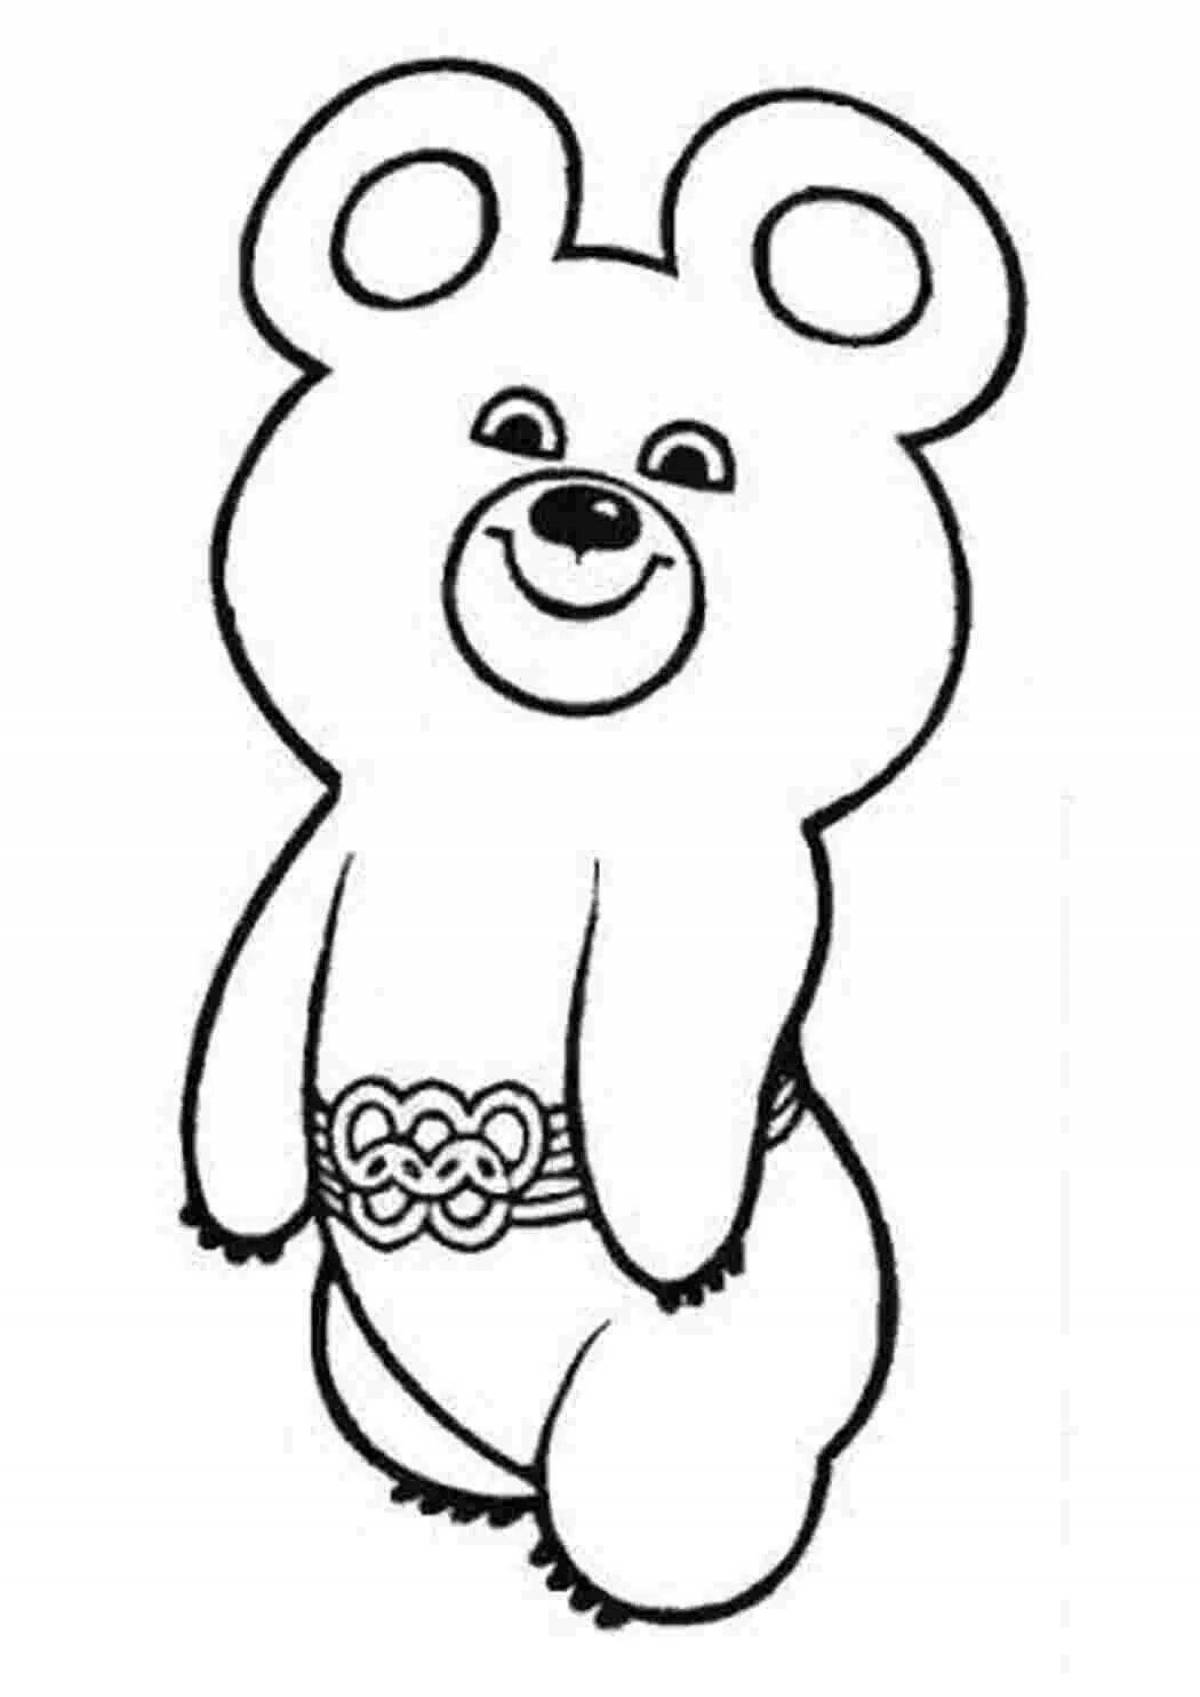 Olympic teddy bear coloring for kids